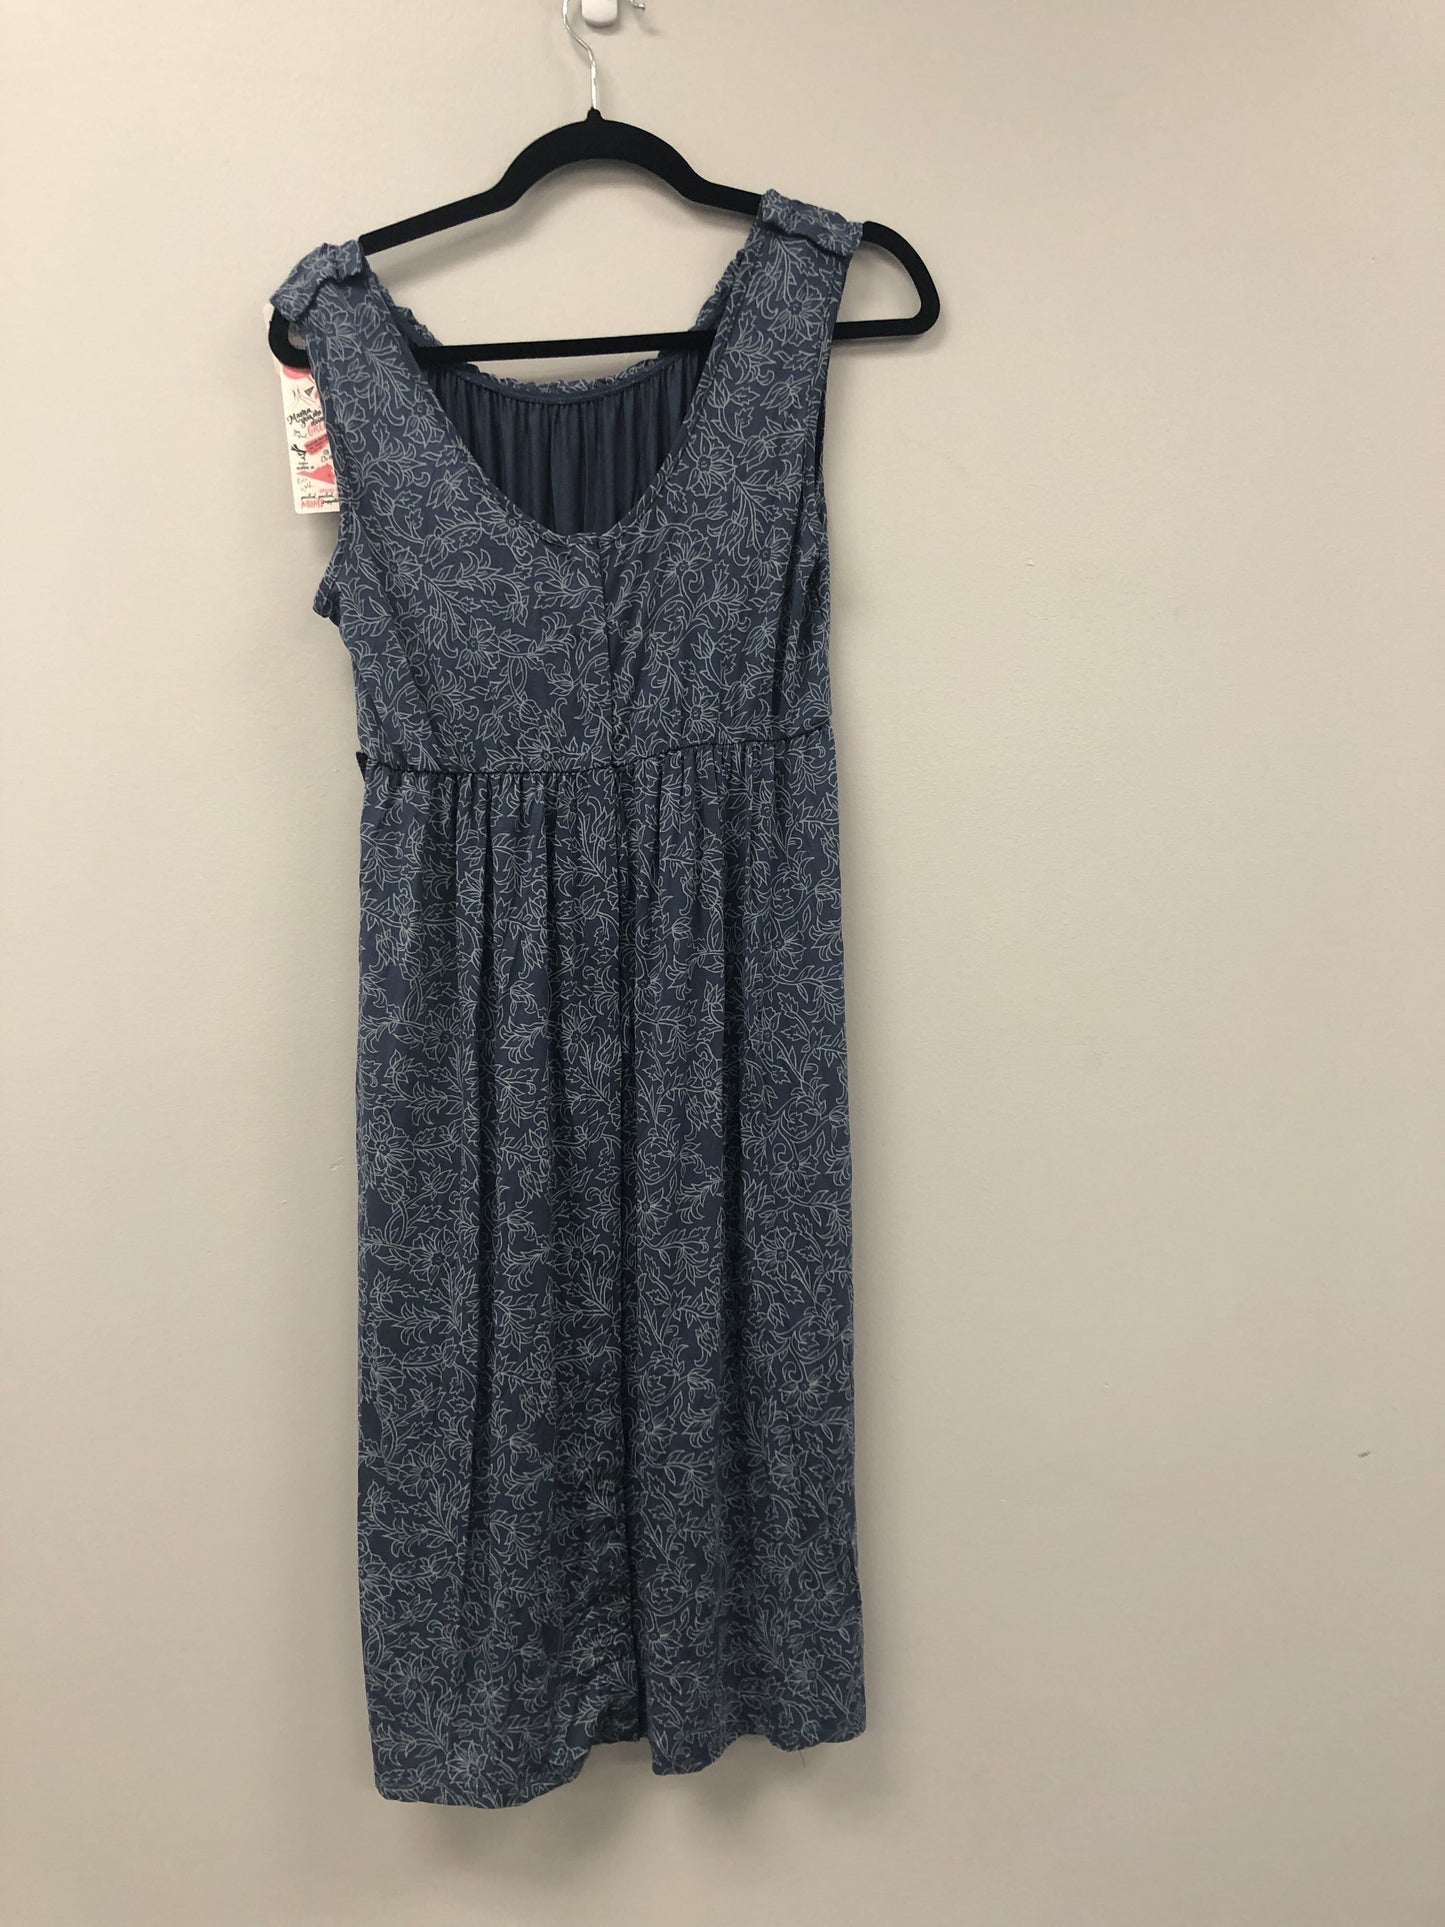 Outlet 5672 - Latched Mama Labor Dress 2.0 - Stormy Blue Floral - Medium